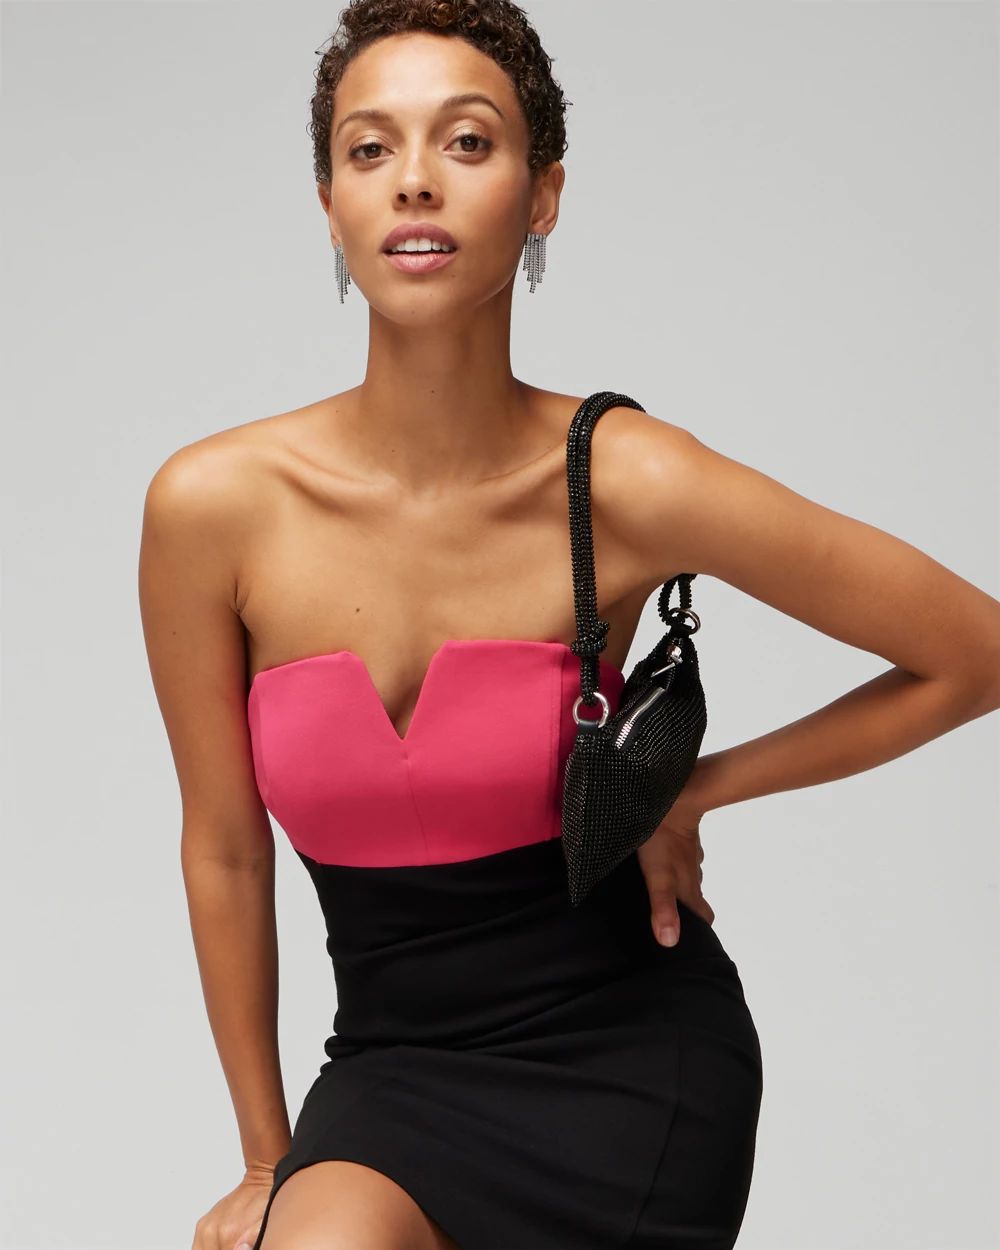 Strapless Colorblock Tuxedo Mini Dress click to view larger image.